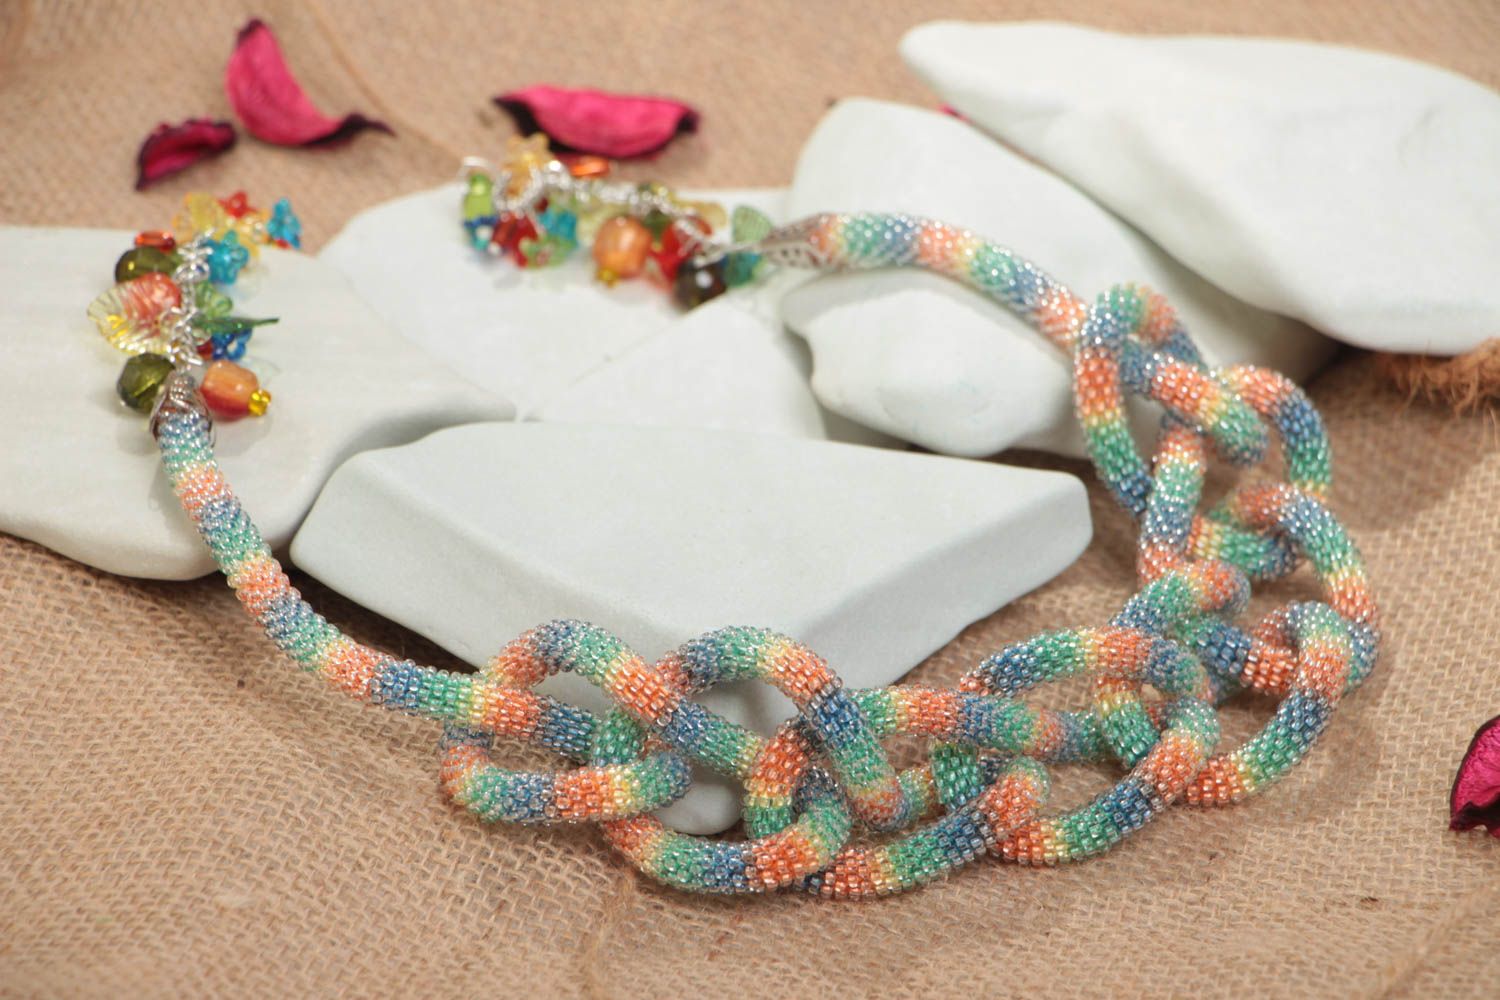 Handmade designer bead woven cord necklace with tender rainbow coloring   photo 1